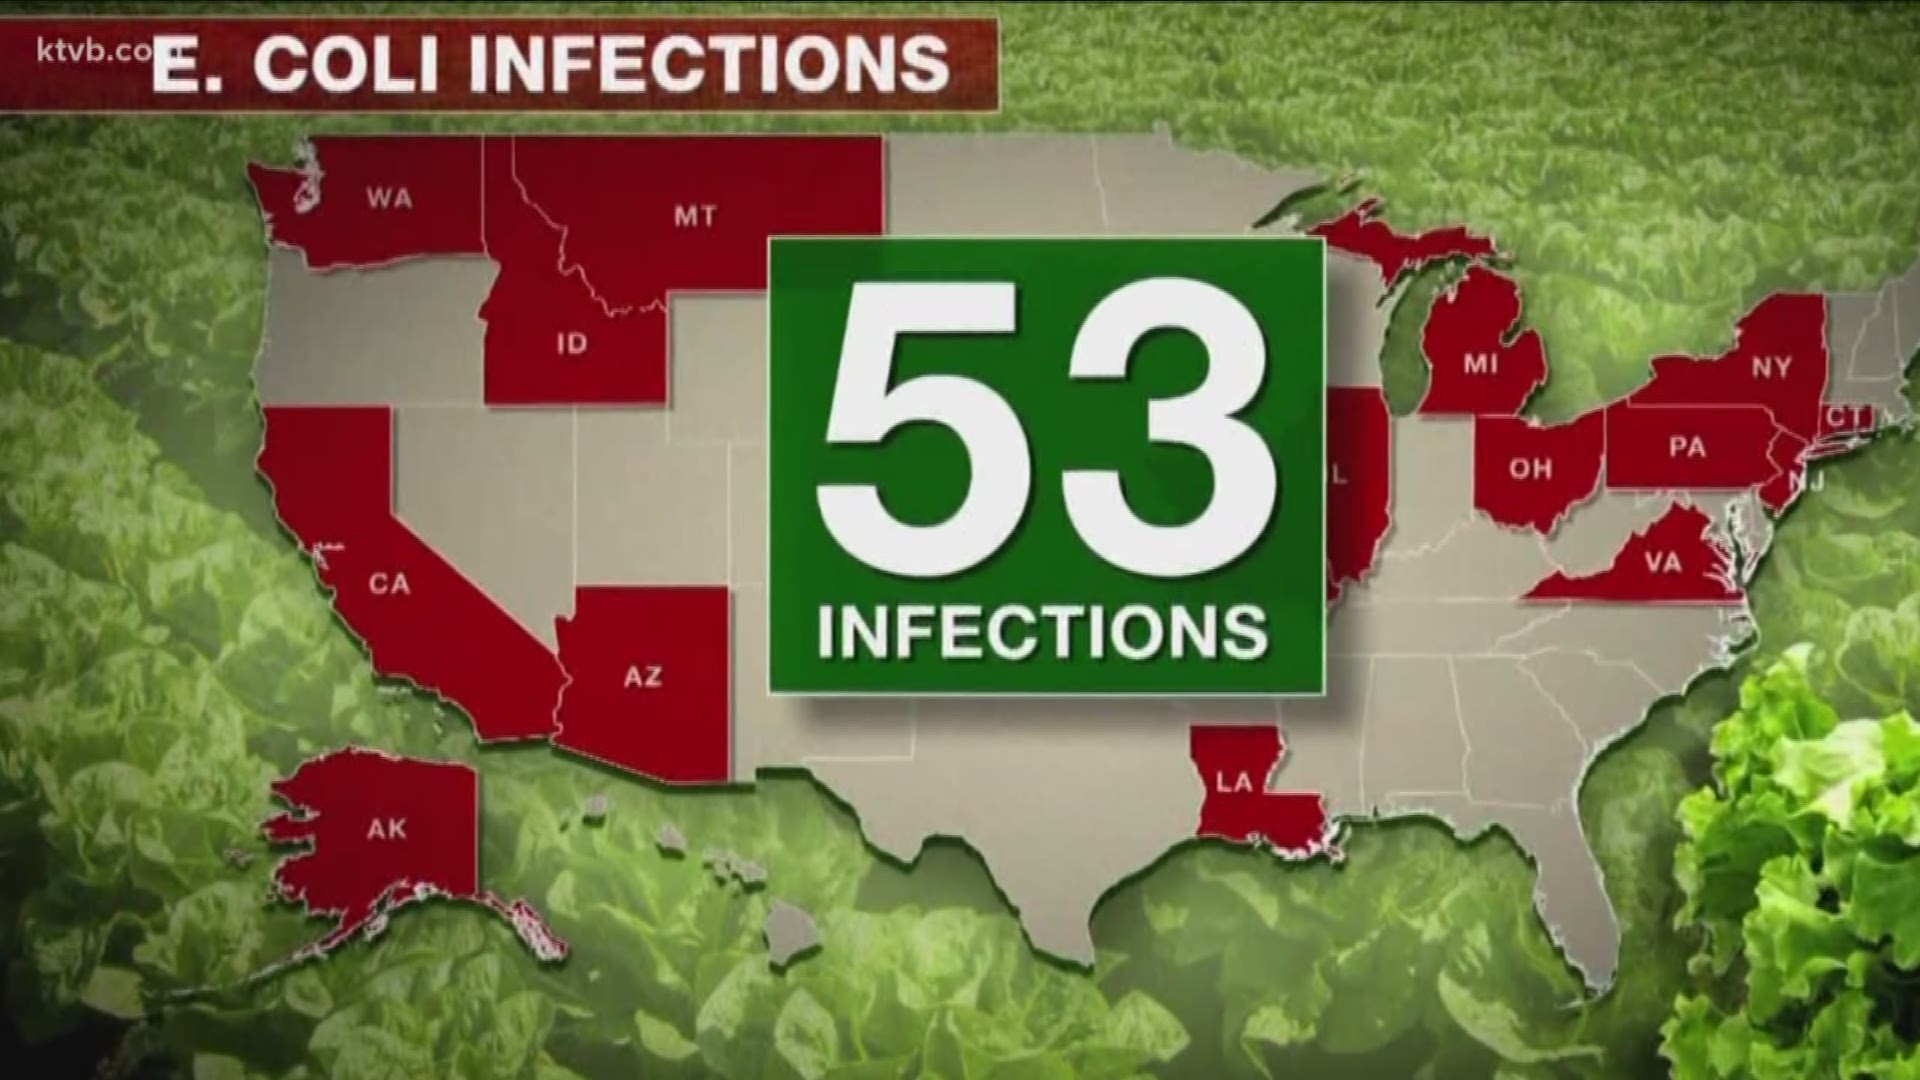 CDC expands warning about E. coli outbreak.